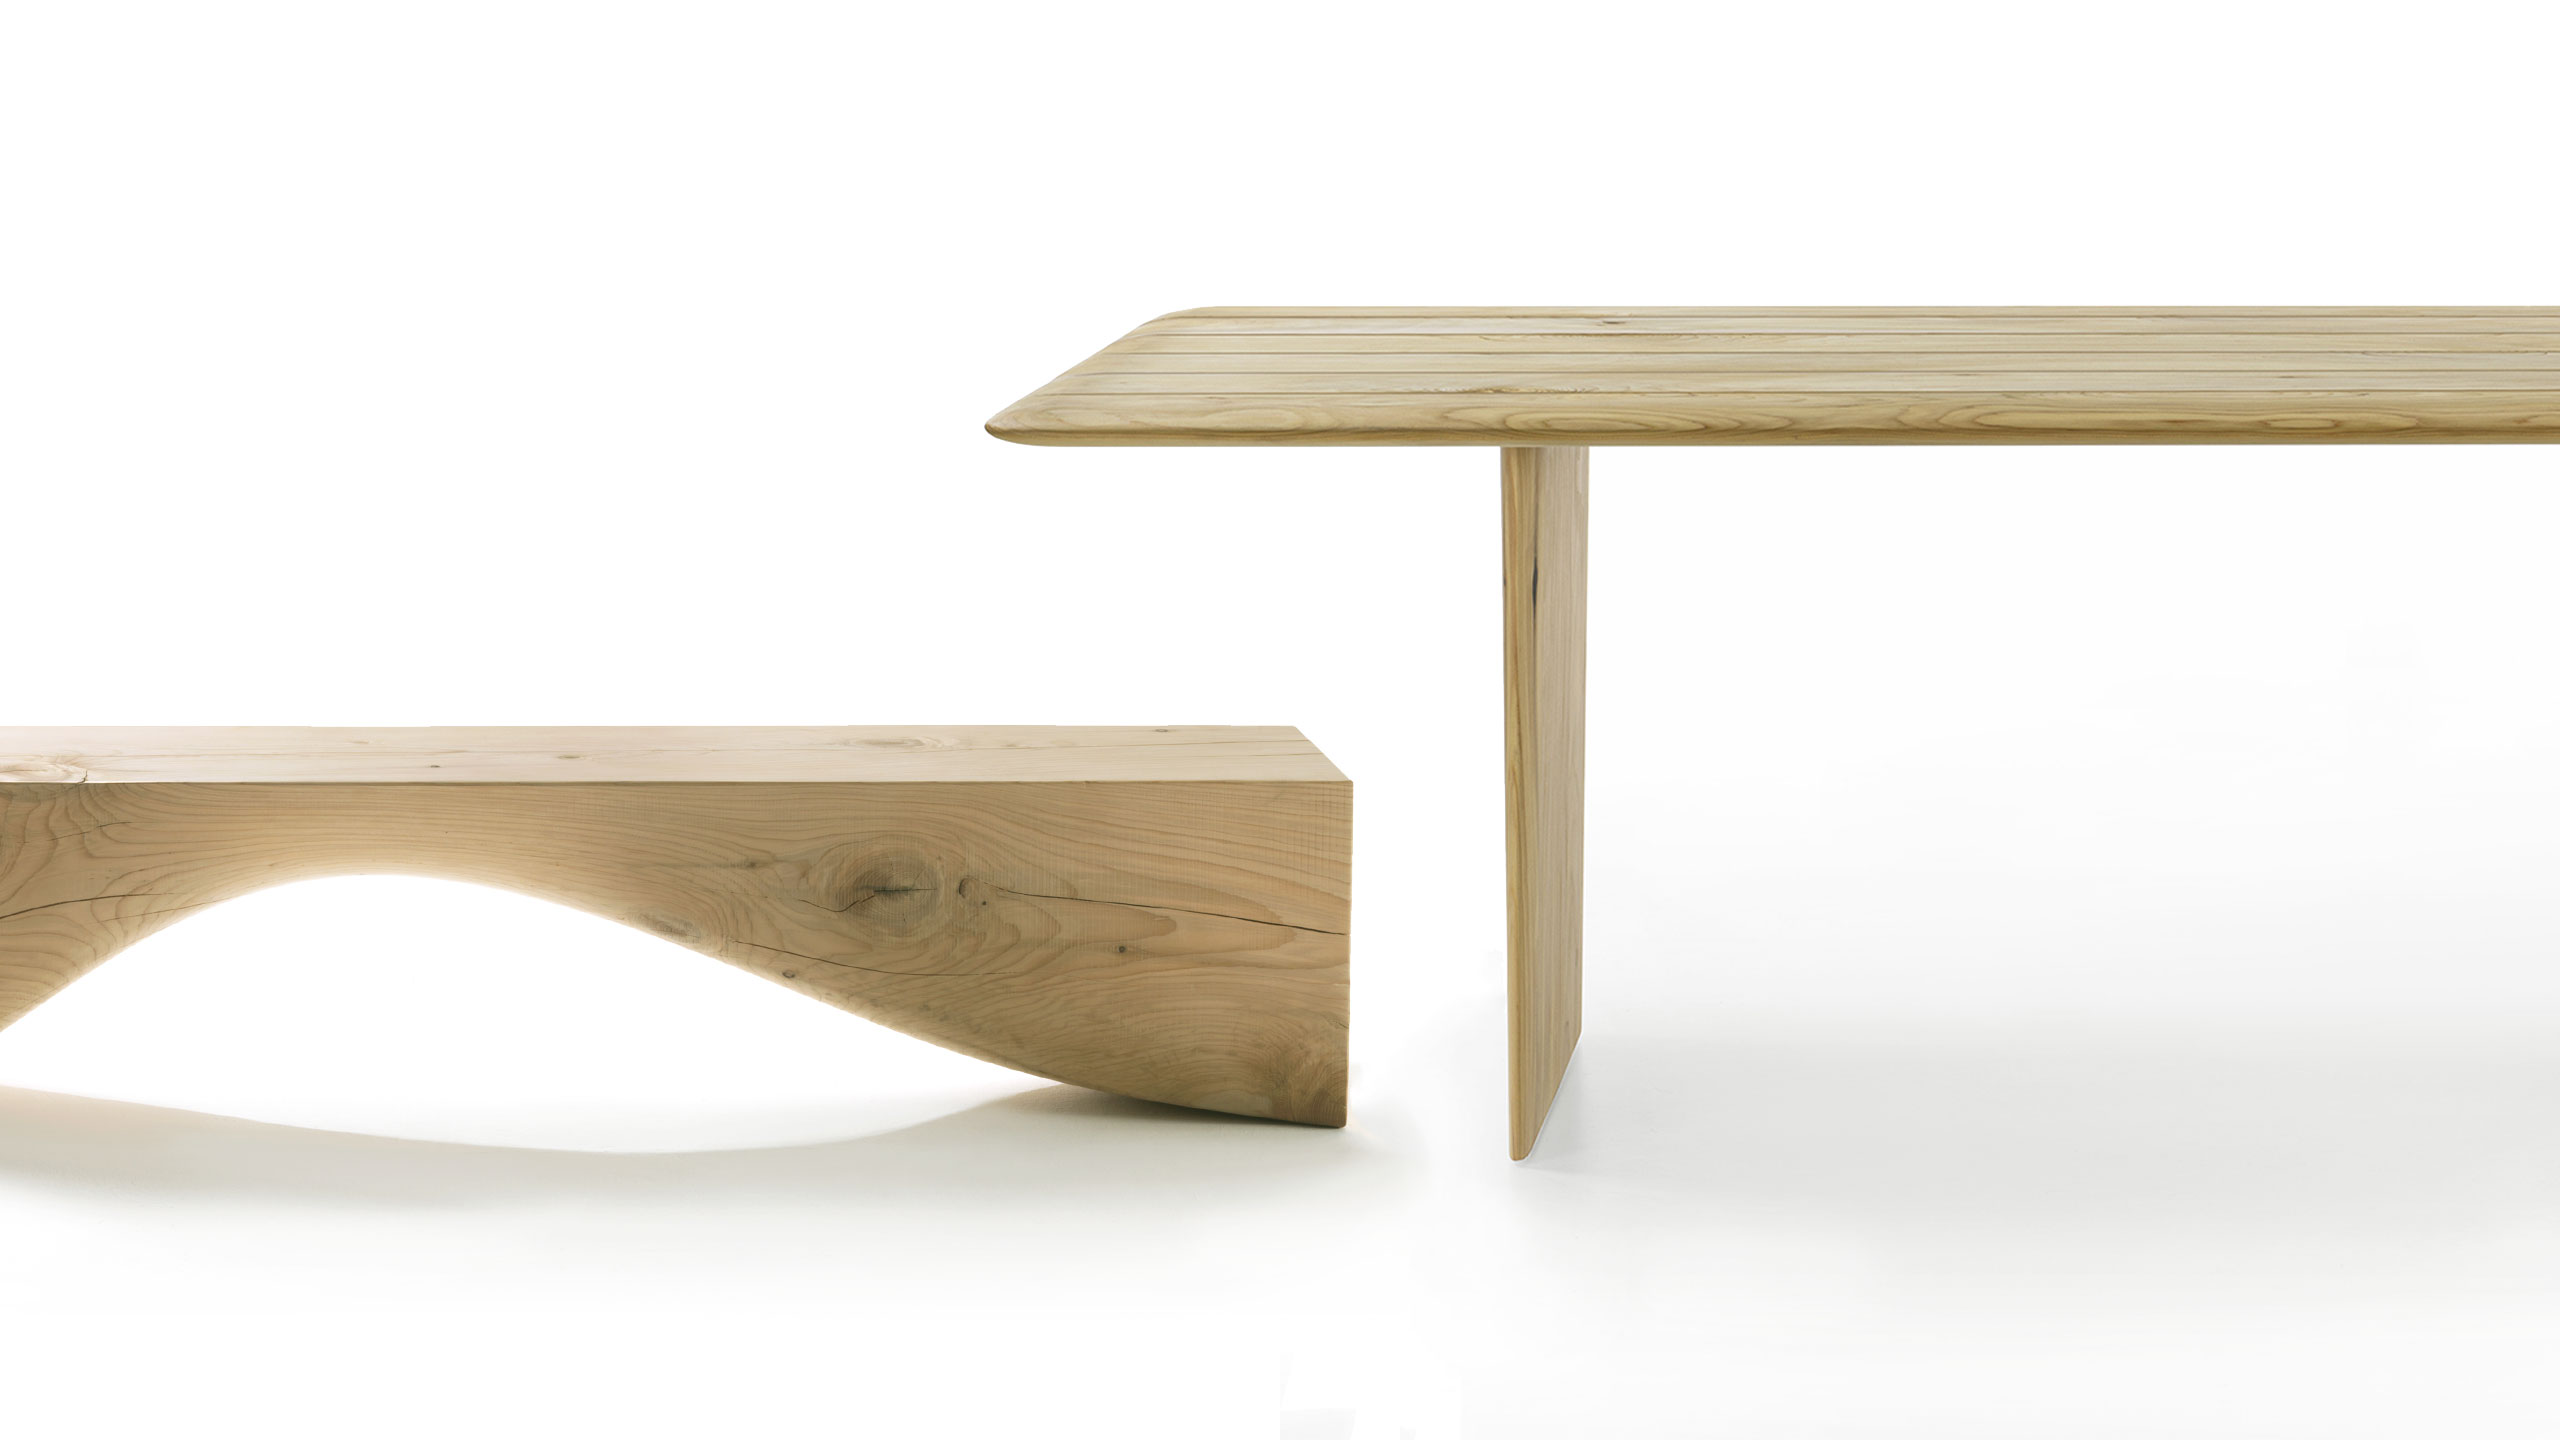 9° Design Awards “Outdoor Table and Bench”